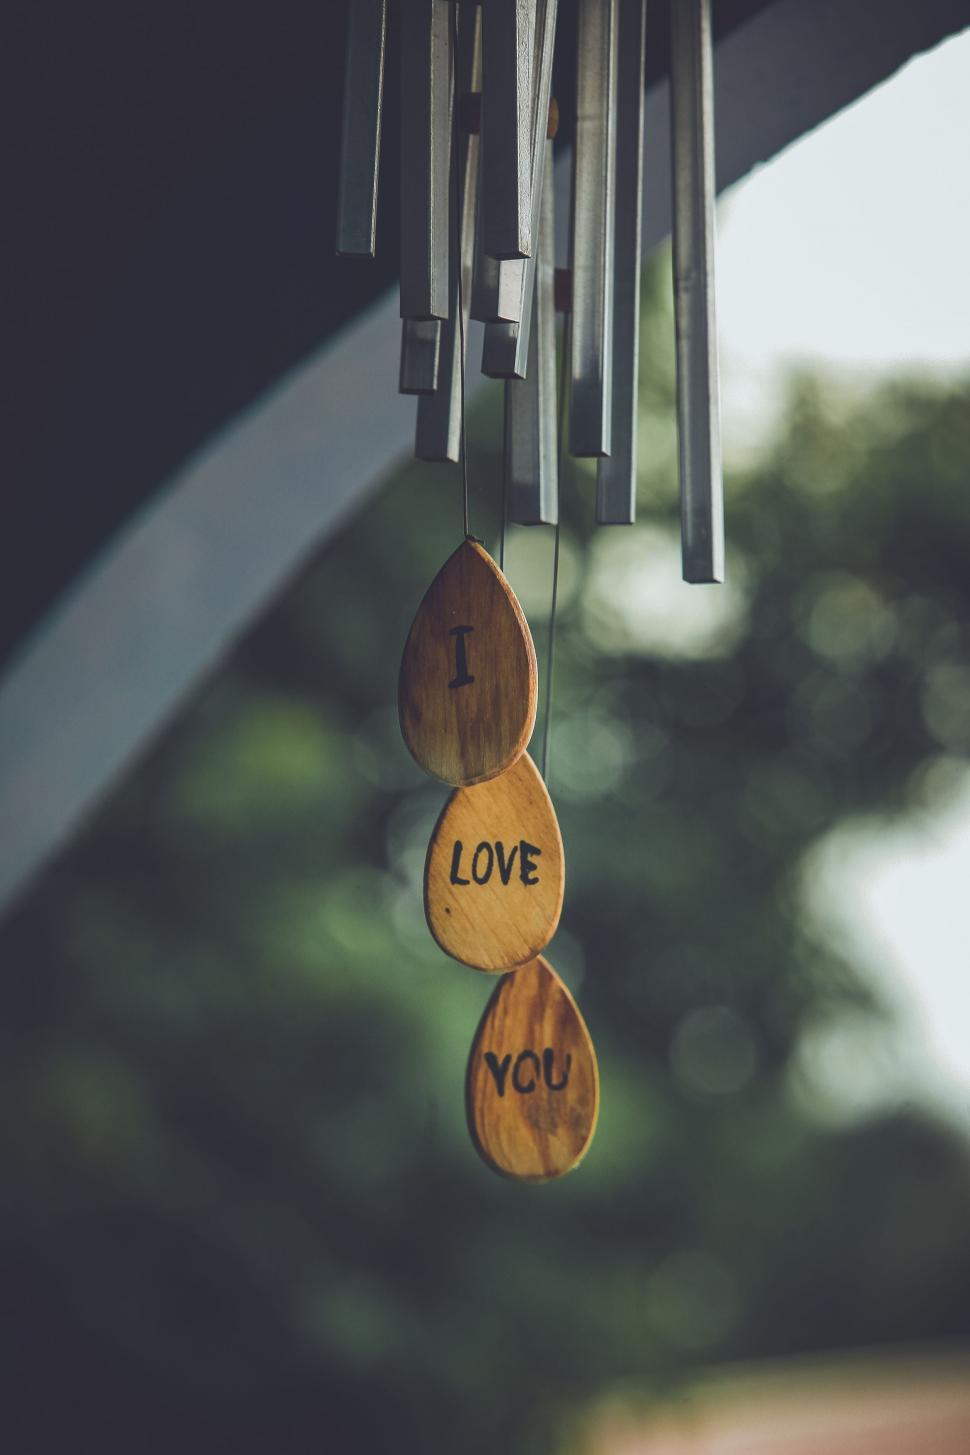 Free Image of Wooden Hearts Wind Chime 